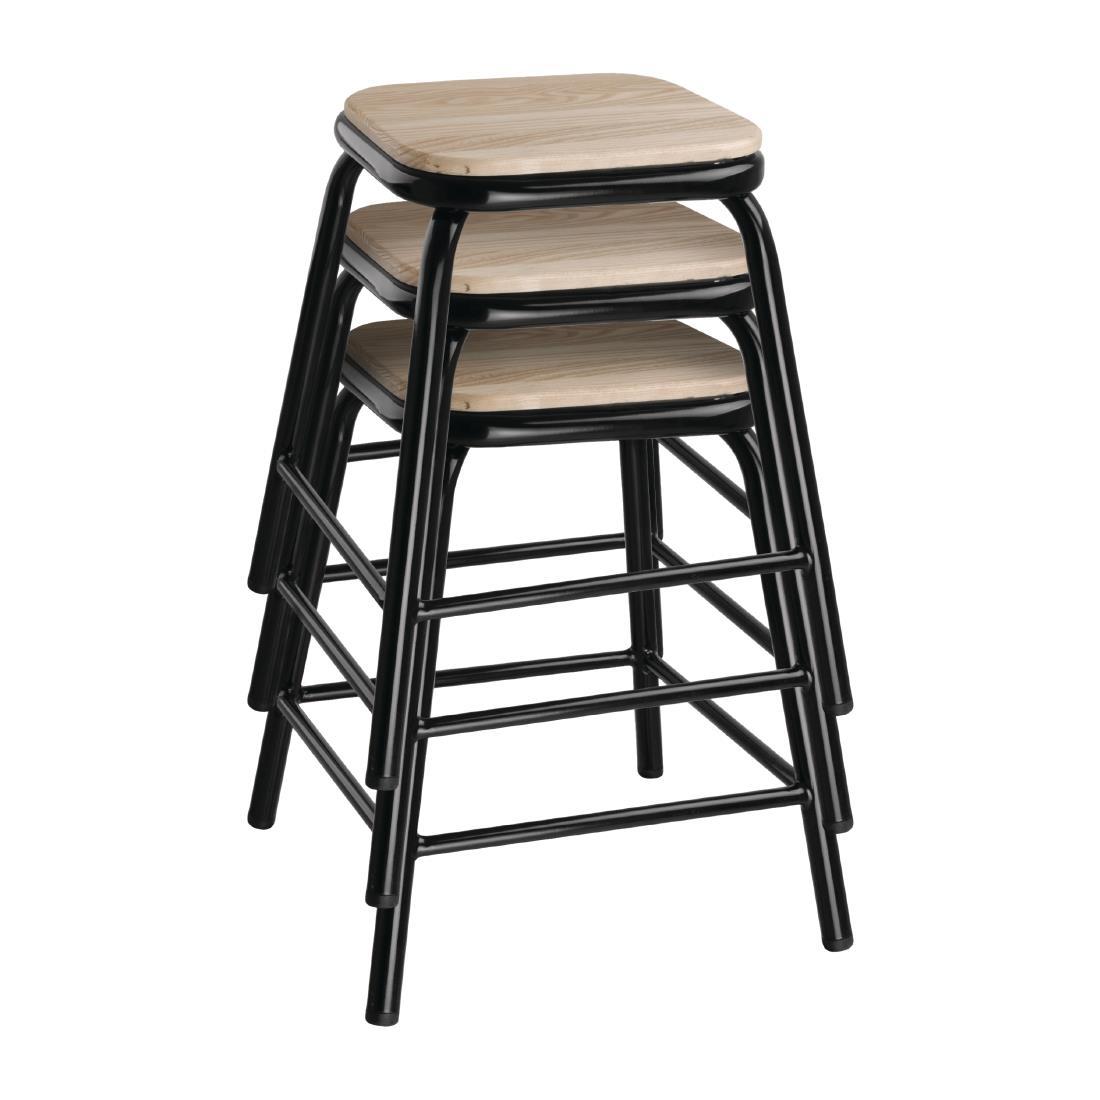 Bolero Cantina Low Stools with Wooden Seat Pad Black (Pack of 4) - DE481  - 7